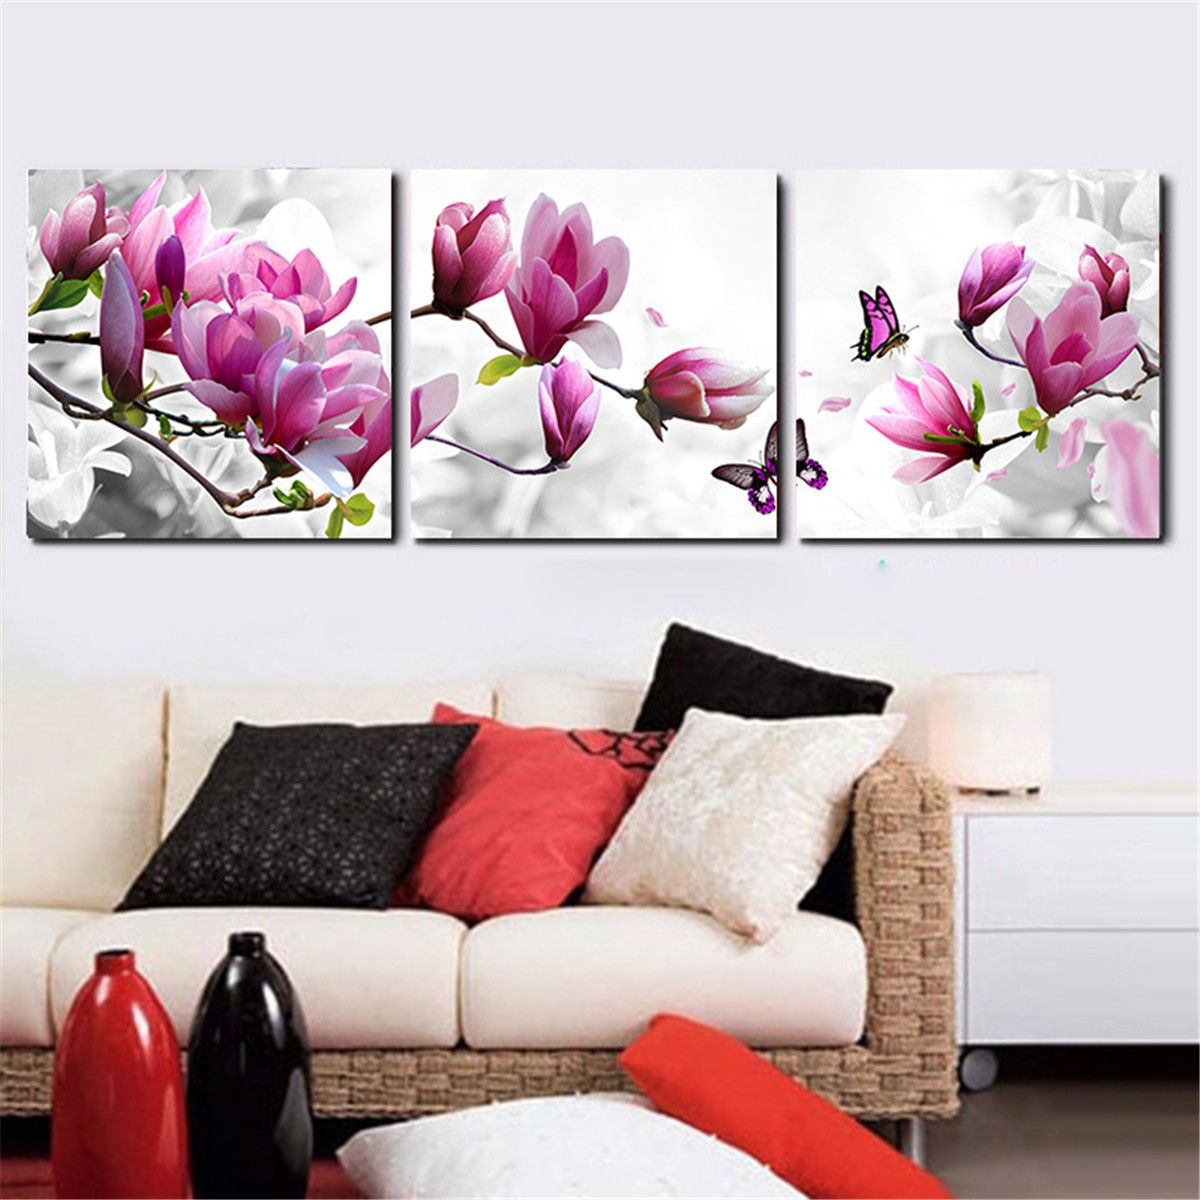 30x30cm-3Pcs-Panel-Framed-Flower-Canvas-Wall-Art-Home-Decor-Modern-Paintings-Print-Picture-1145217